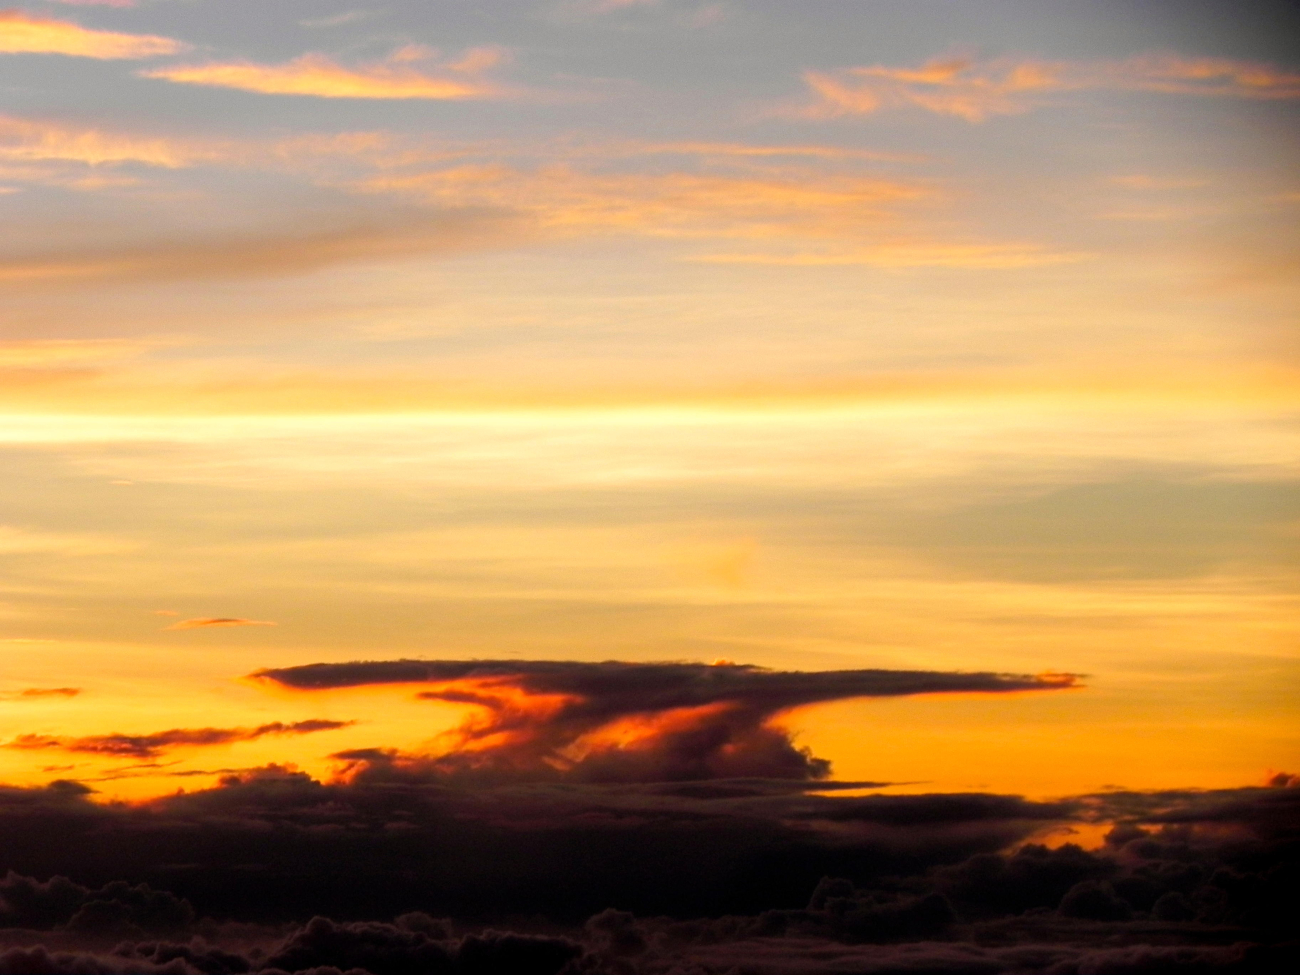 Thunderstorm anvil seen at sunset during mission to Hurricane Cristobal